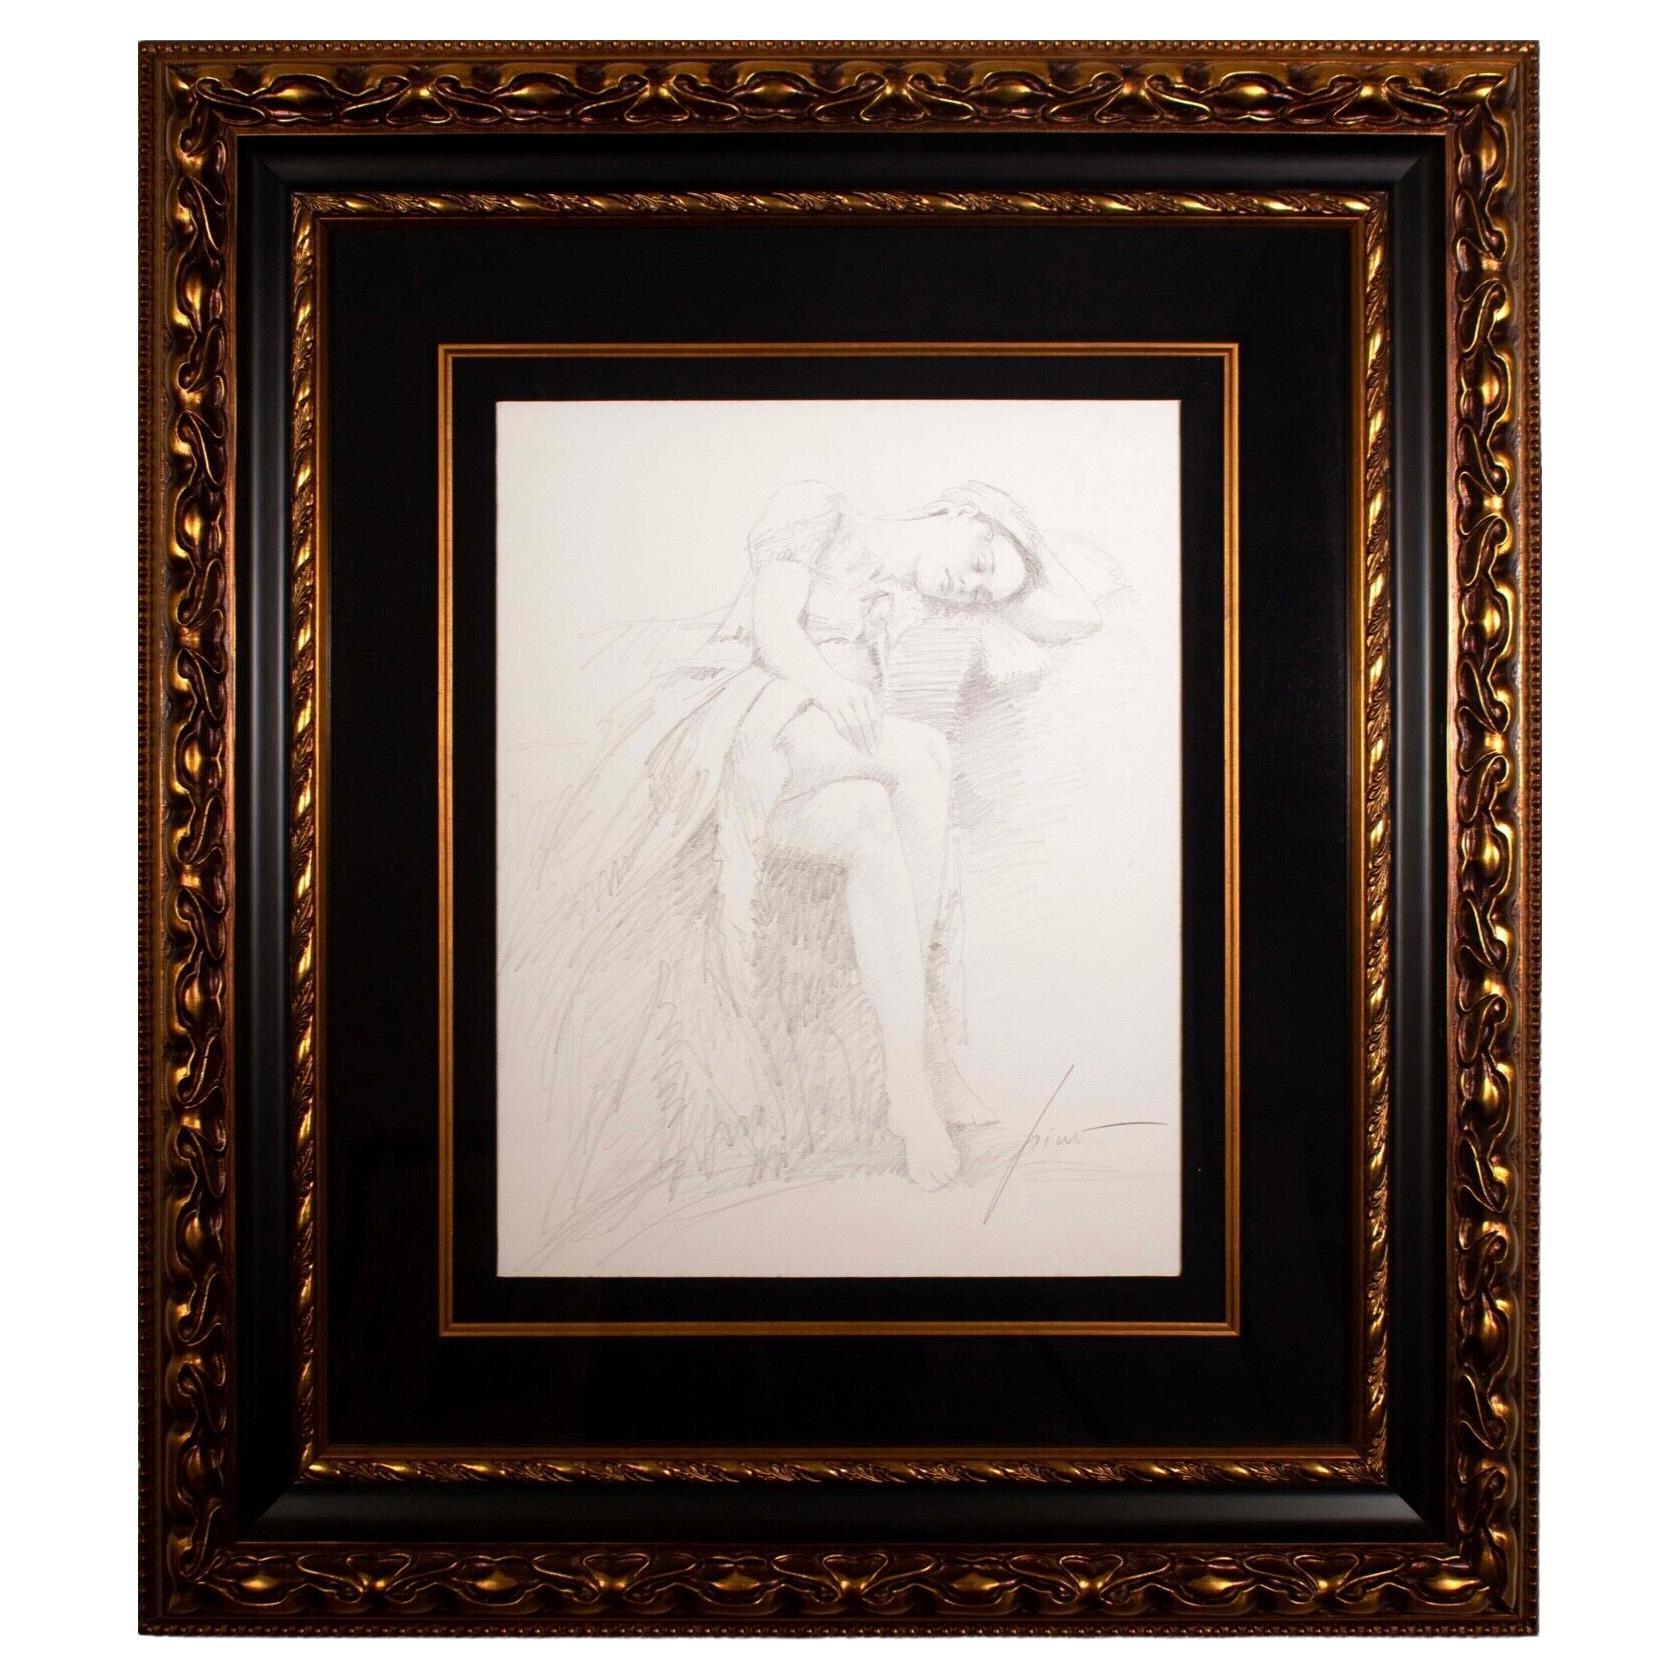 Pino Signed Original Graphite Drawing on Paper Untitled #246 Framed 2009 W/ Coa For Sale